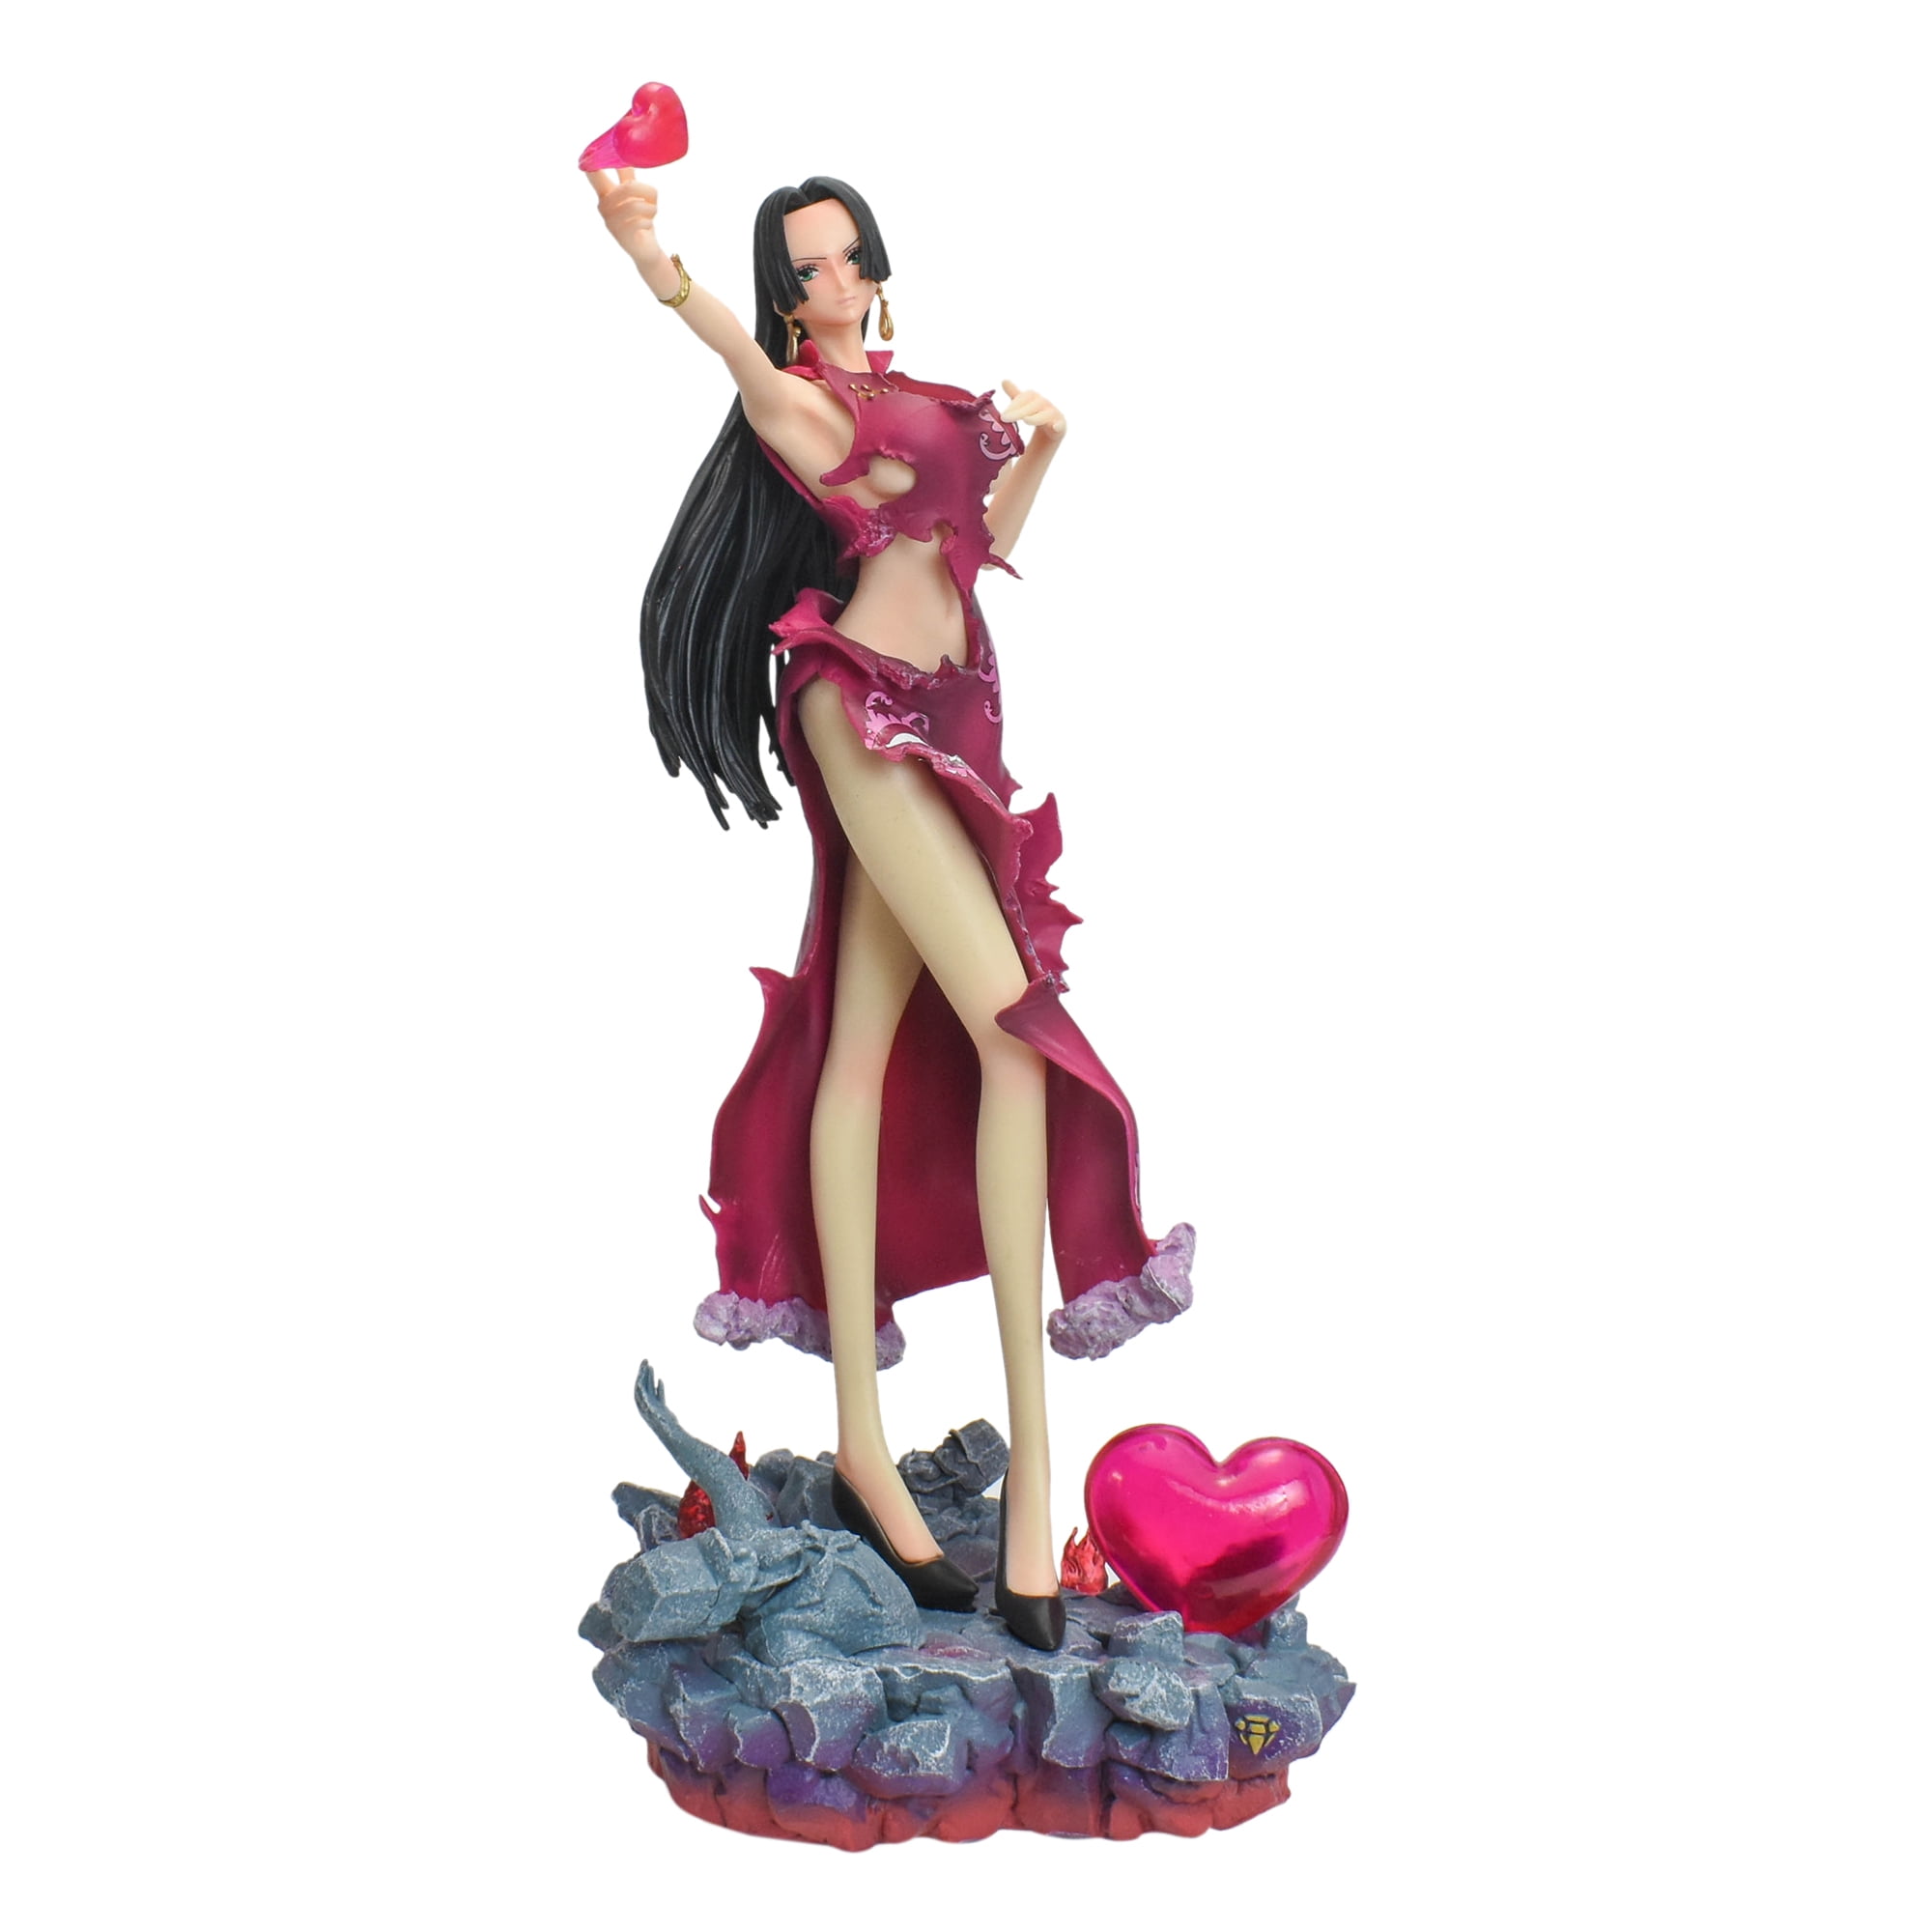 Mimimiao One Piece Boa·Hancock 14cm/5.5inch Cute Girl Q Version Doll Action Figure Anime Character Scene Model/Statue PVC Figures Animation Collectibles/Gifts/Toys Three Colors